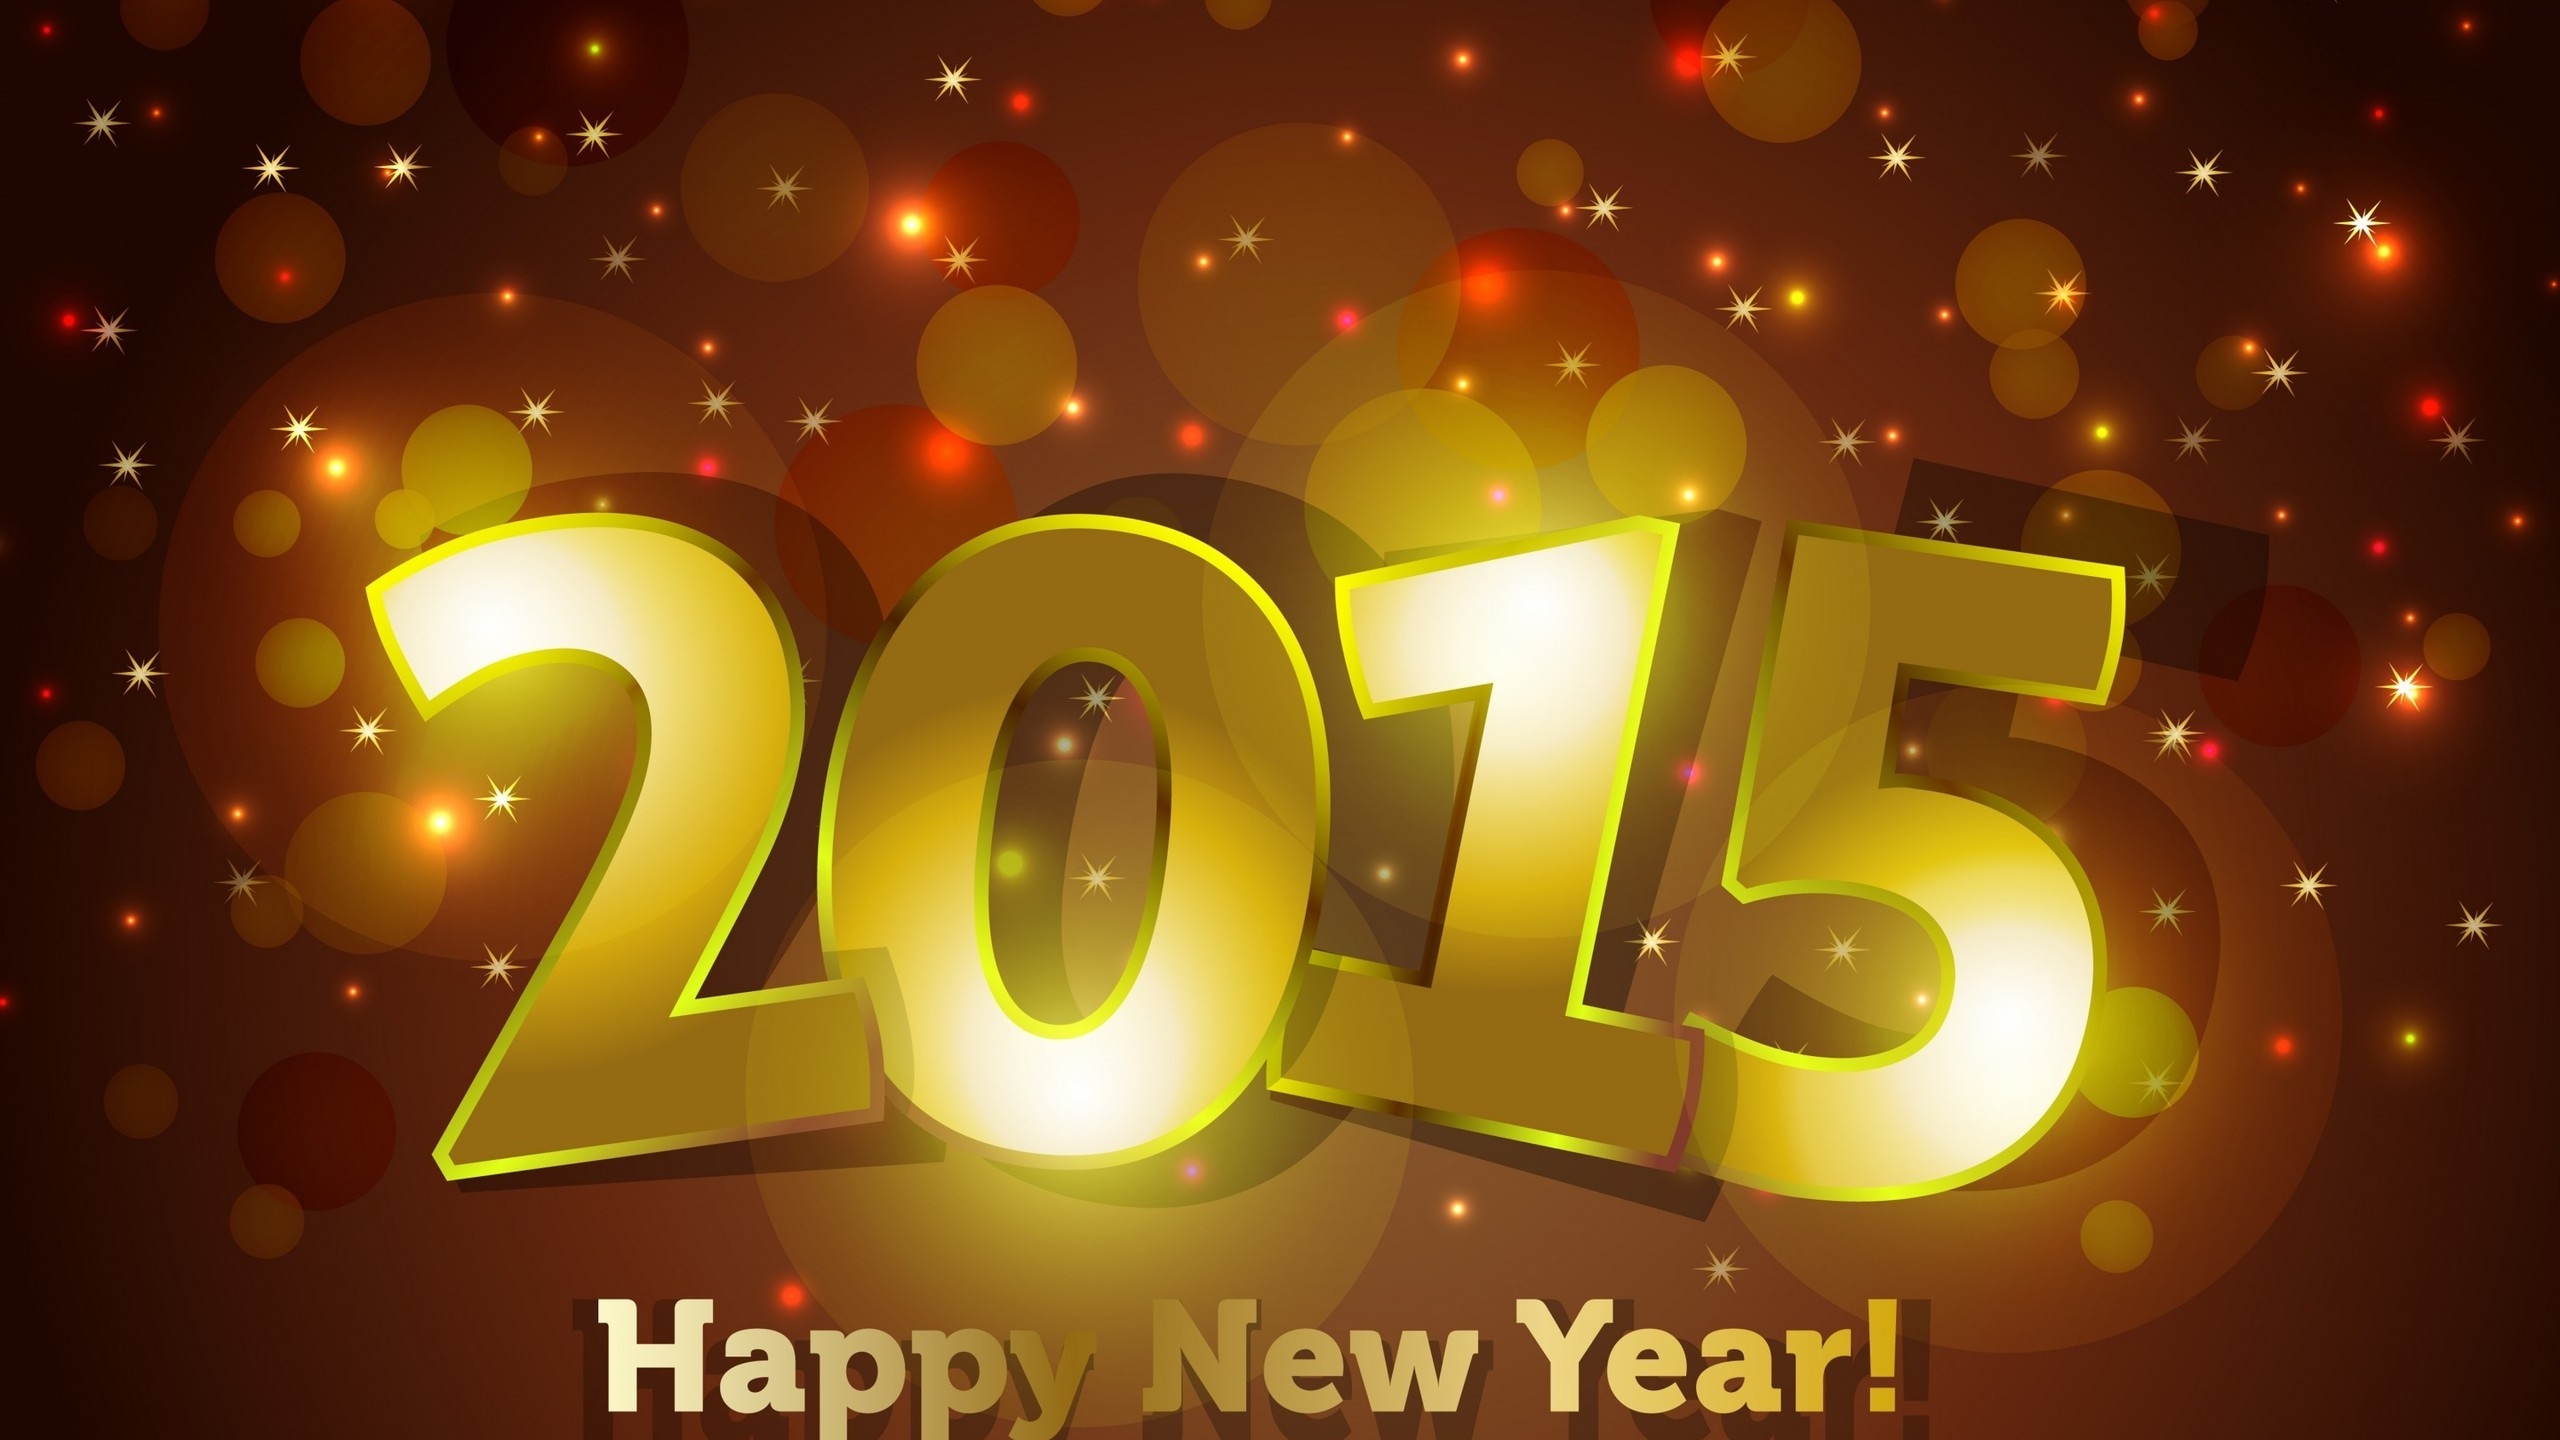 Happy New 2015  for 2560x1440 HDTV resolution